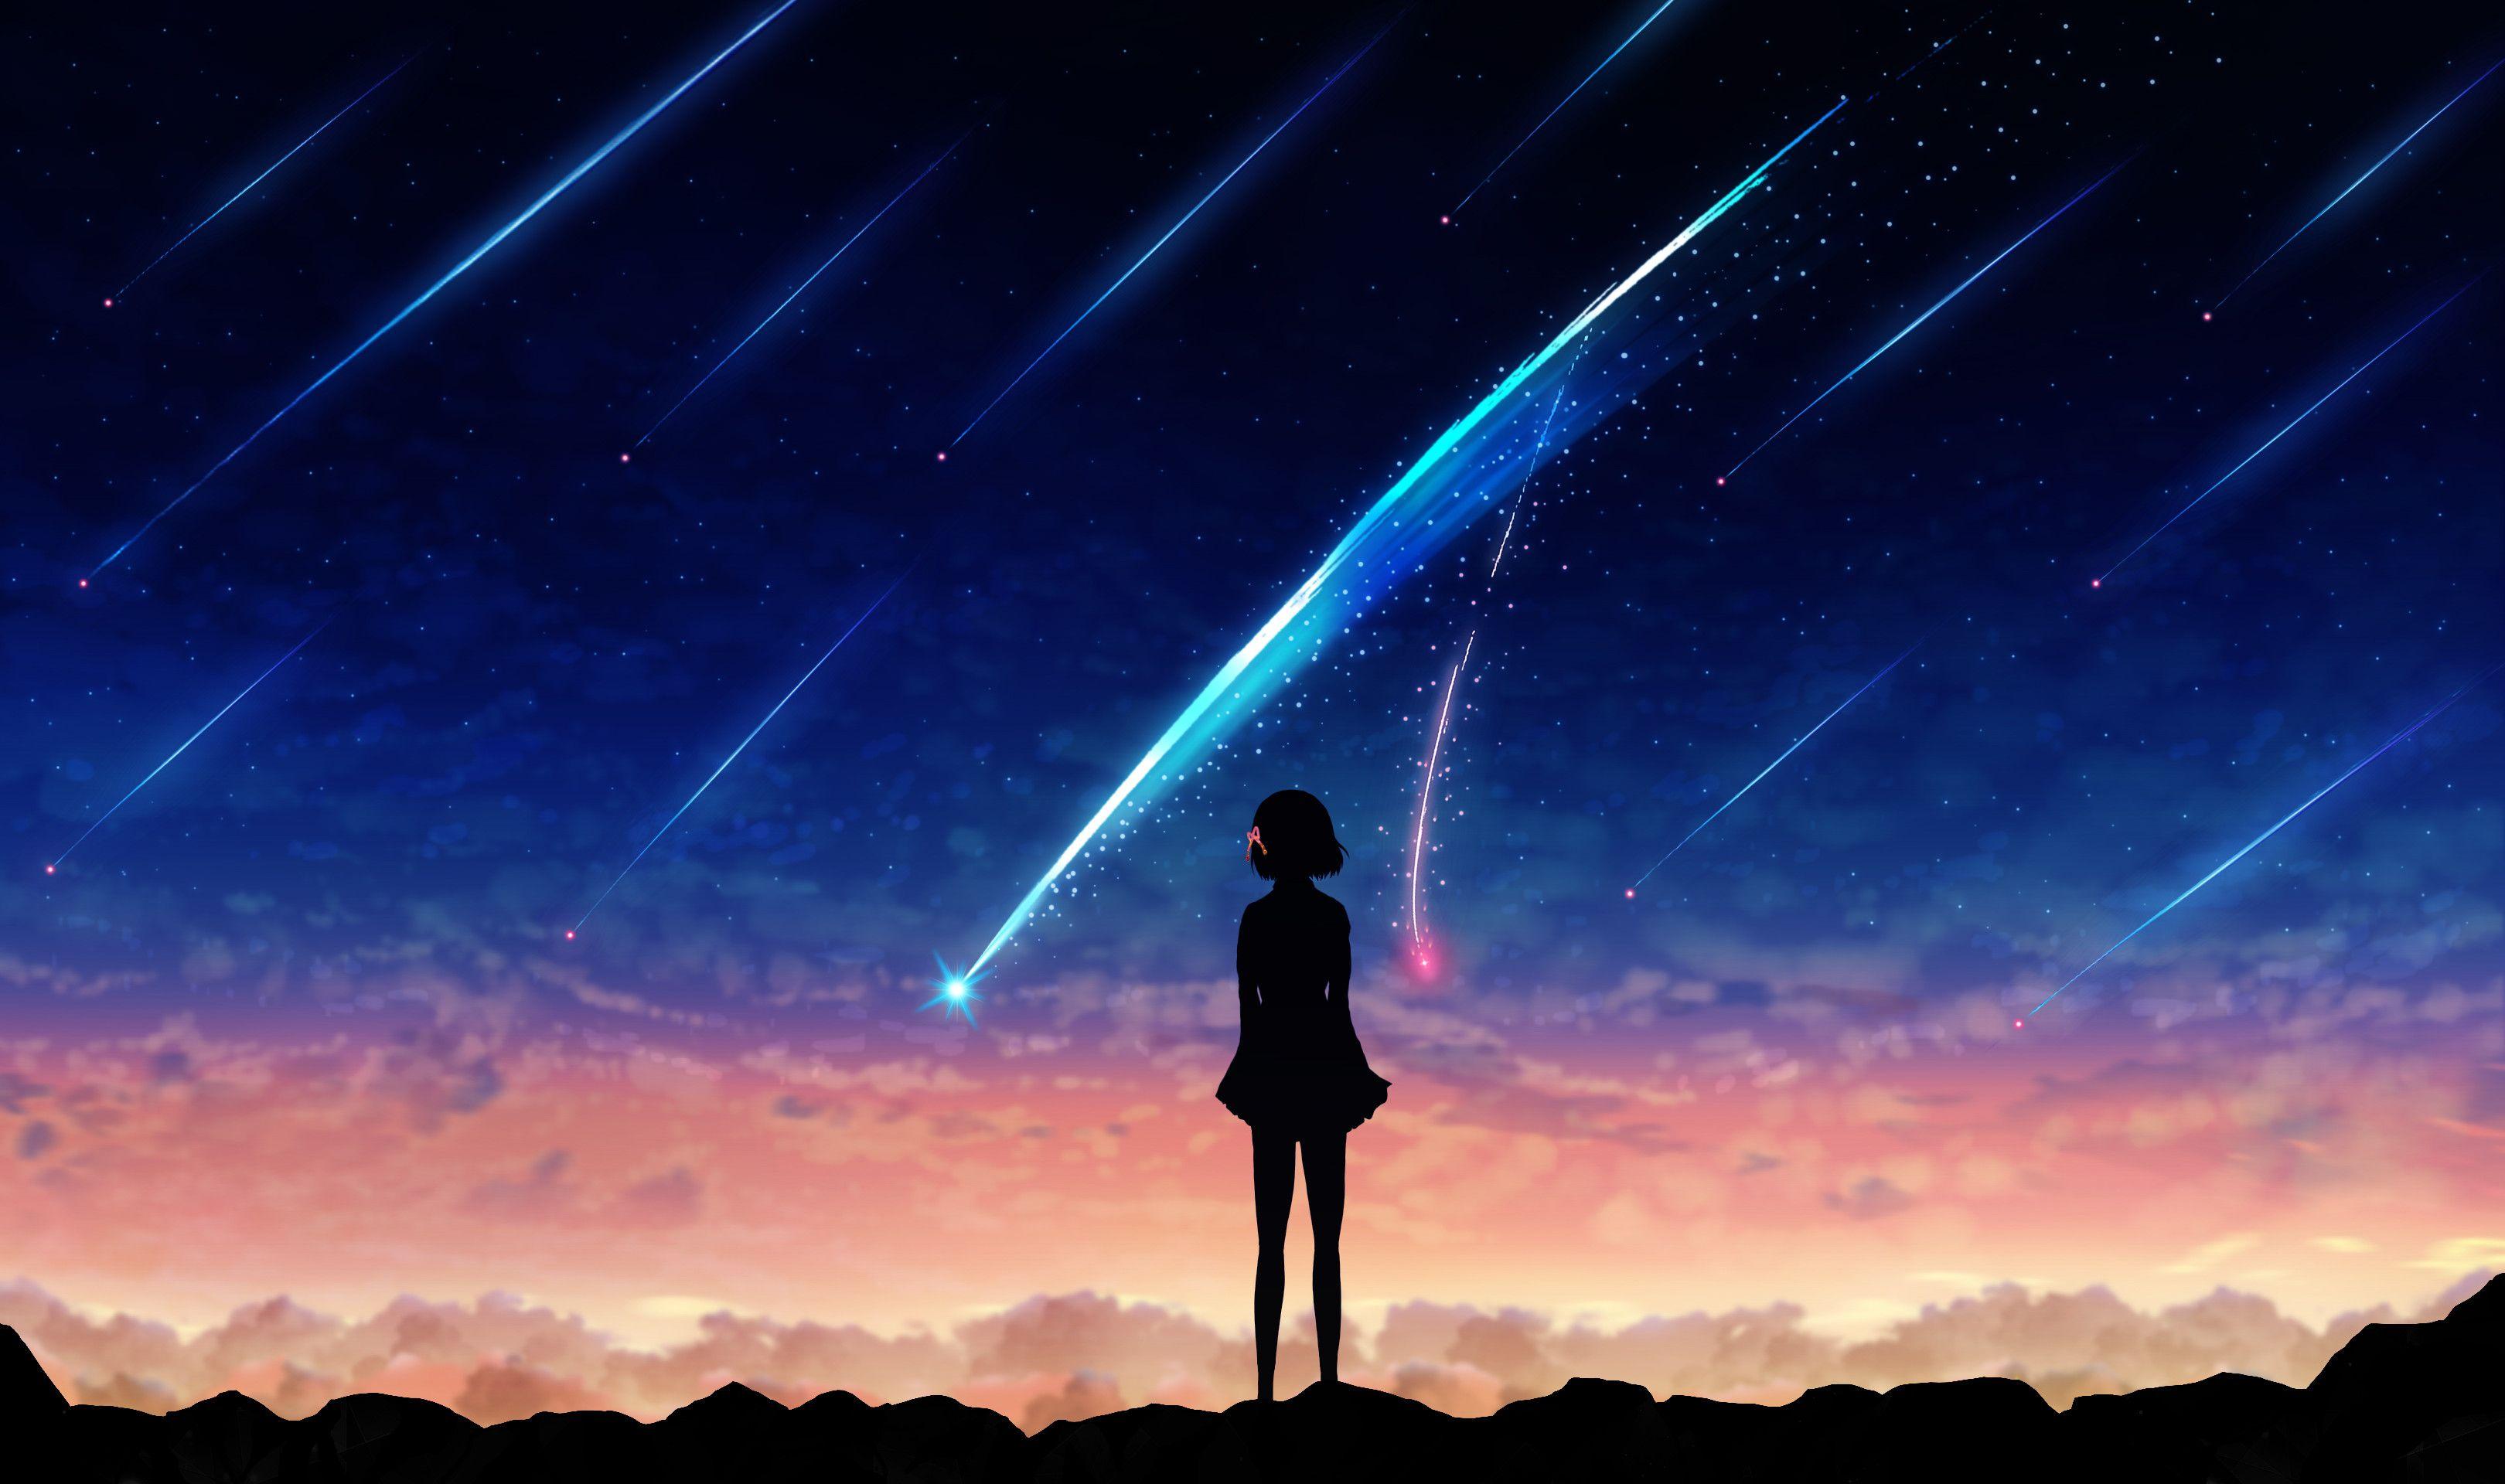 Your Name Wallpaper